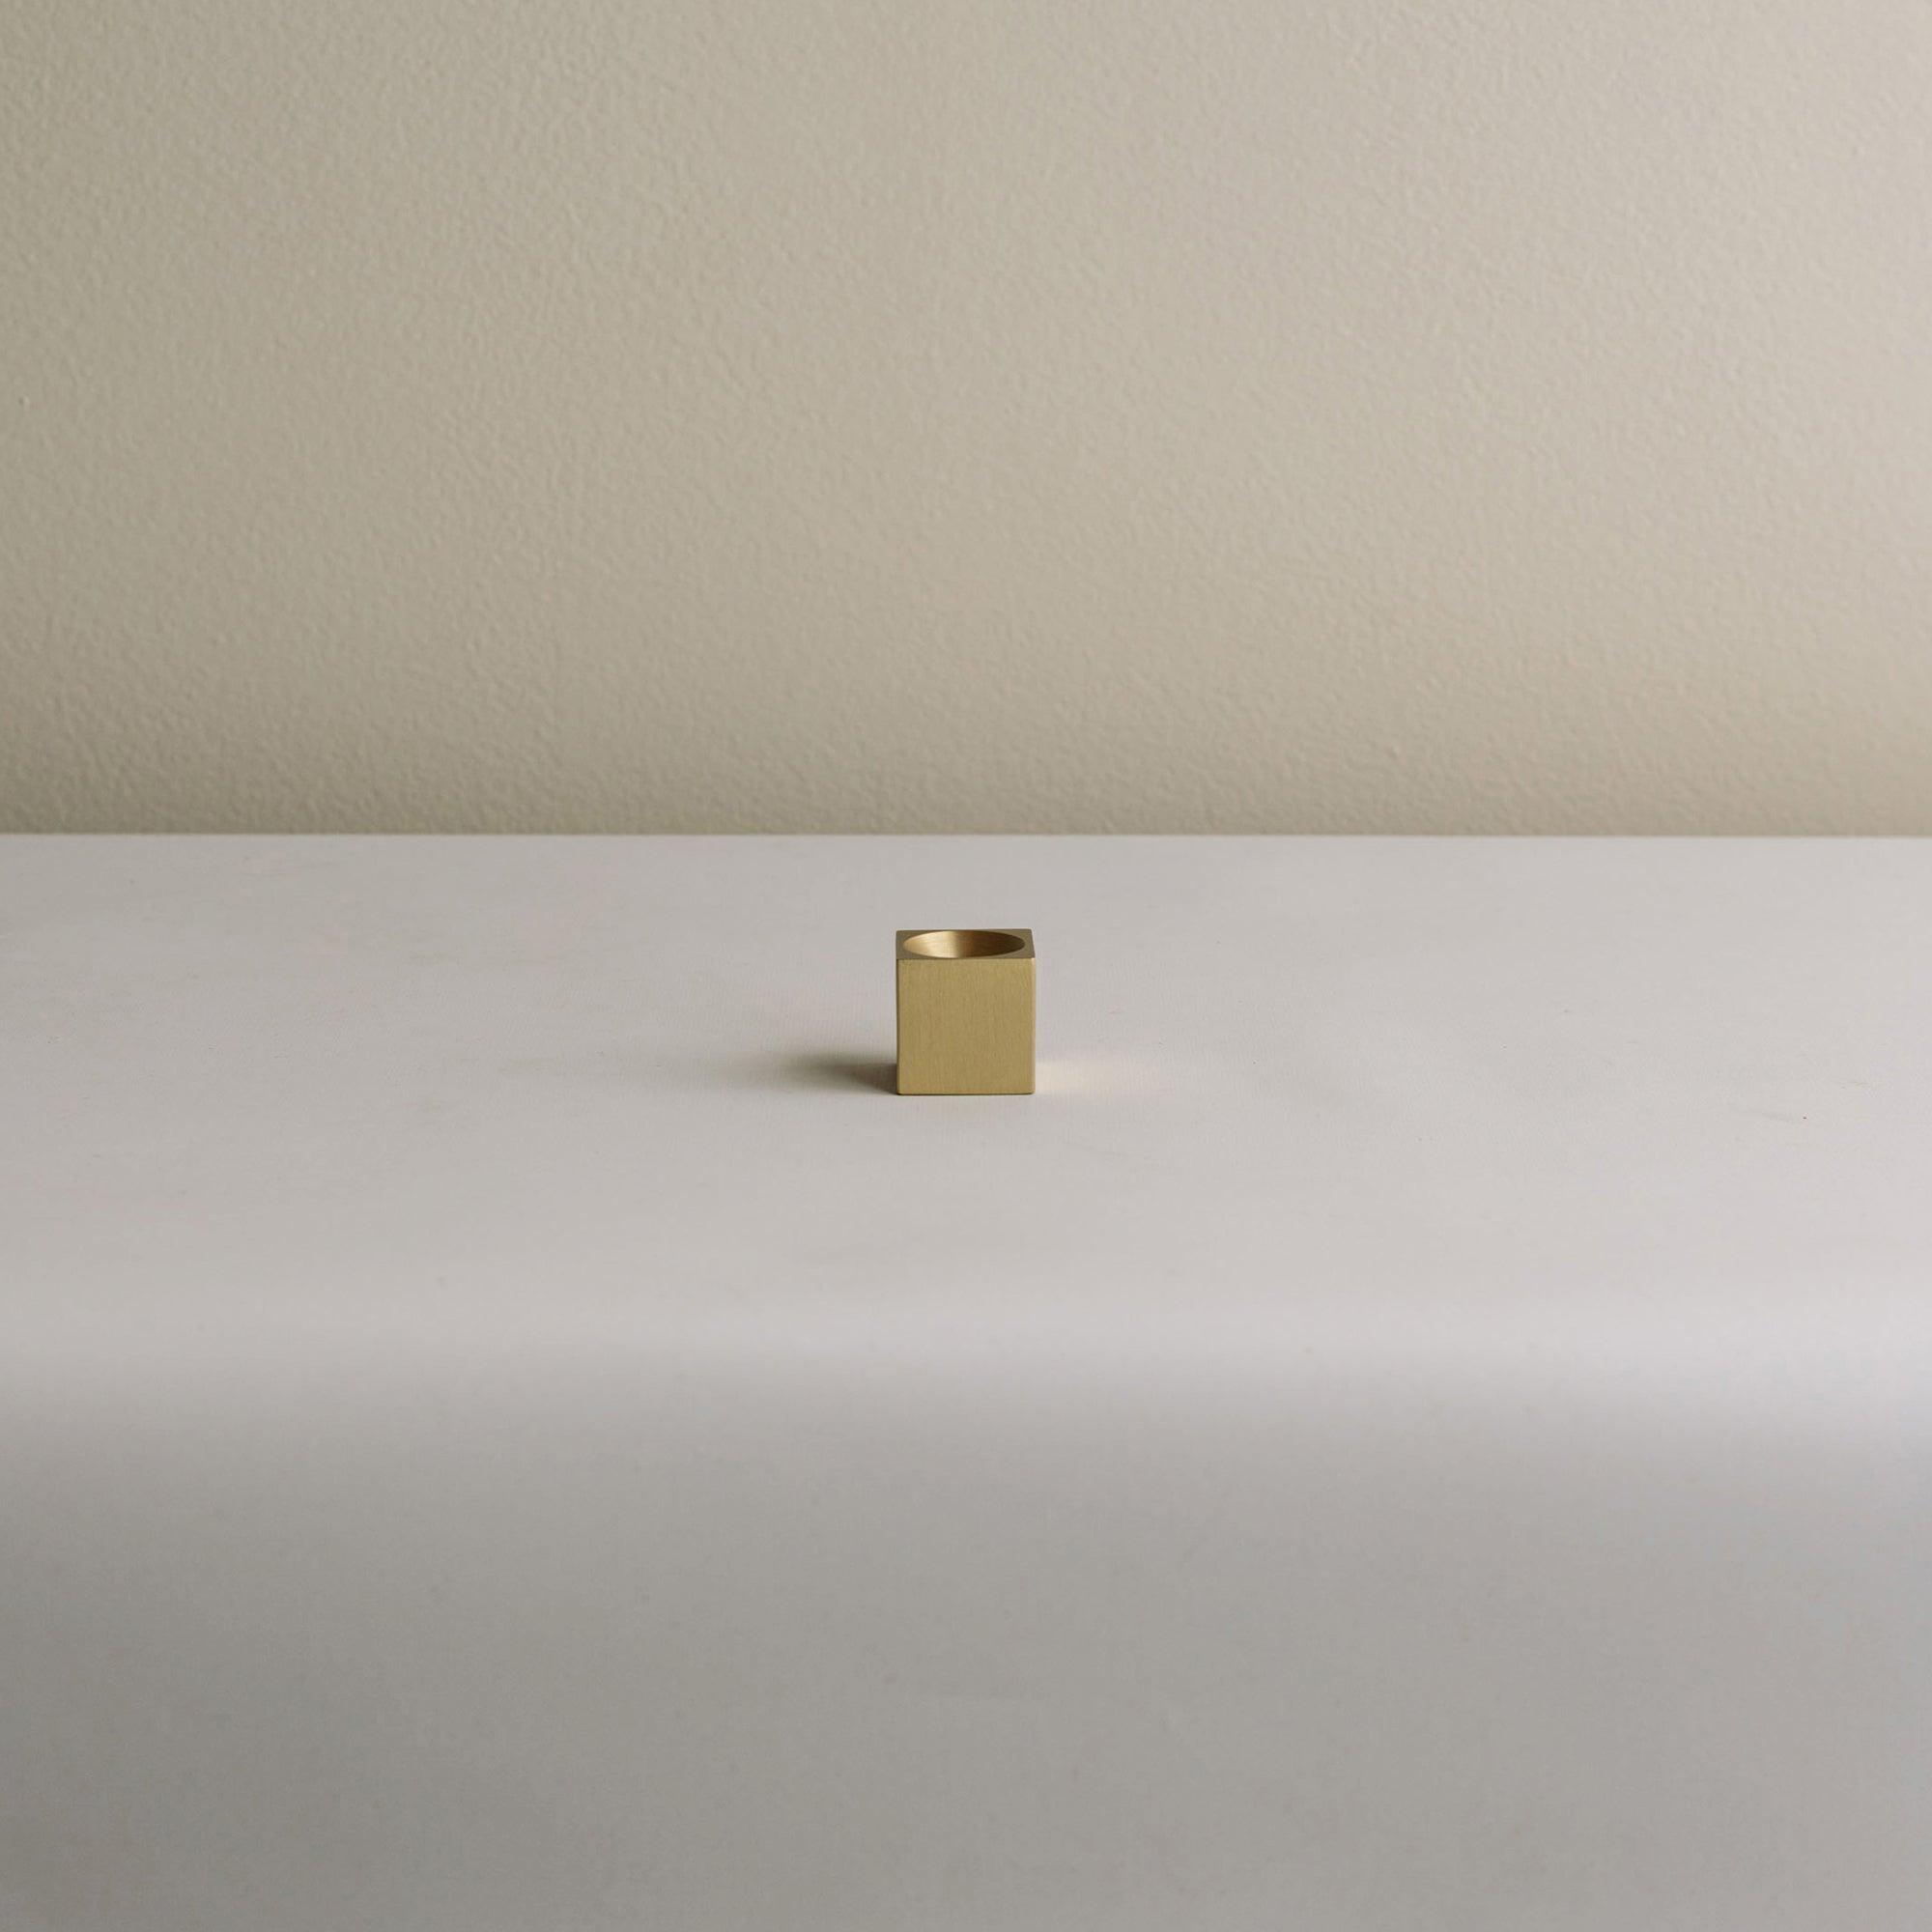 incense holder with a cubic shape and a brass